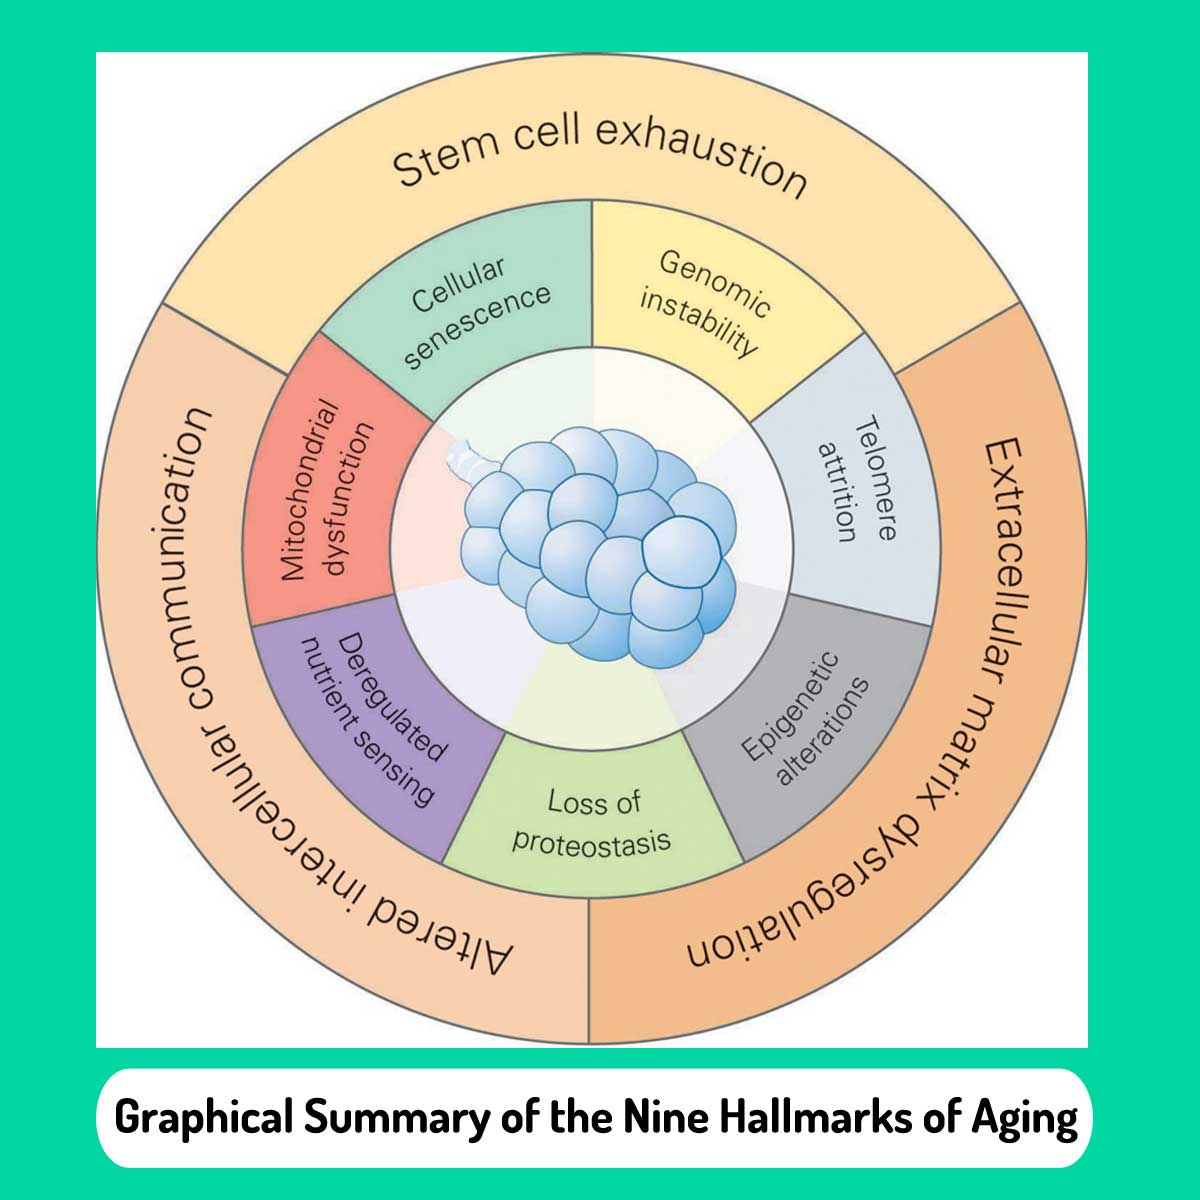 Graphical Summary of the Nine Hallmarks of Aging